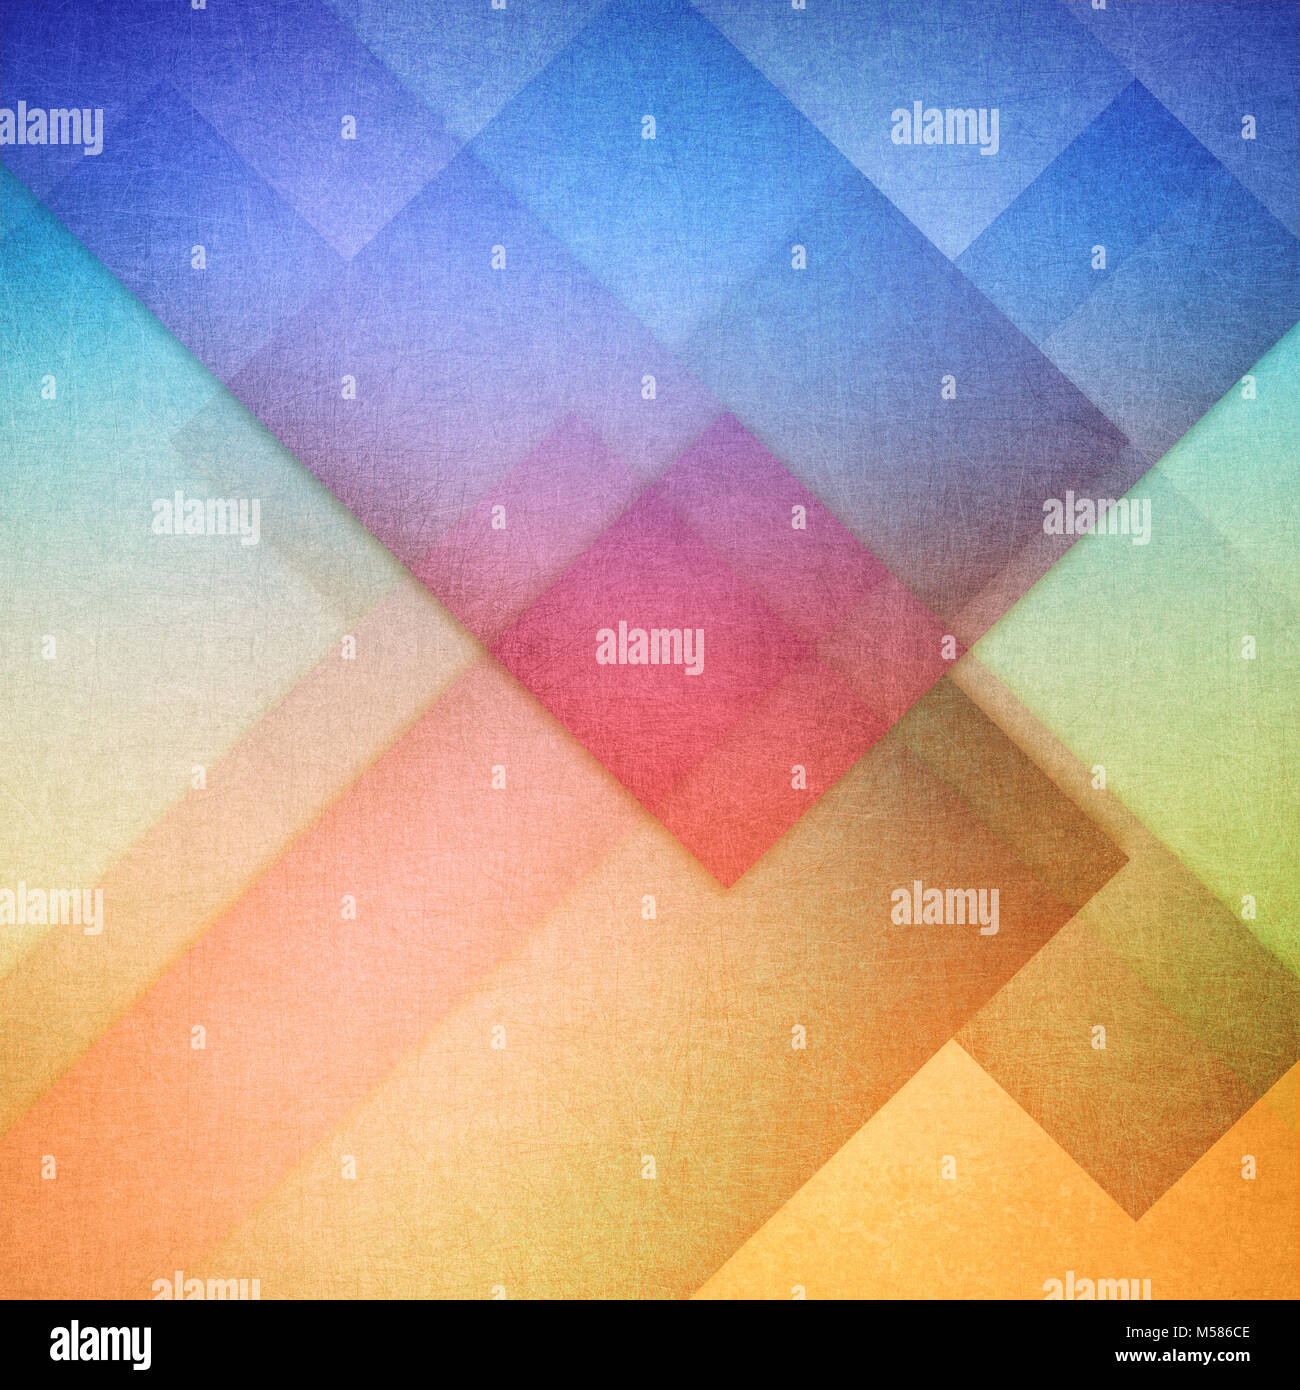 elegant blue gold background texture paper with abstract angles and diagonal shapes Stock Photo